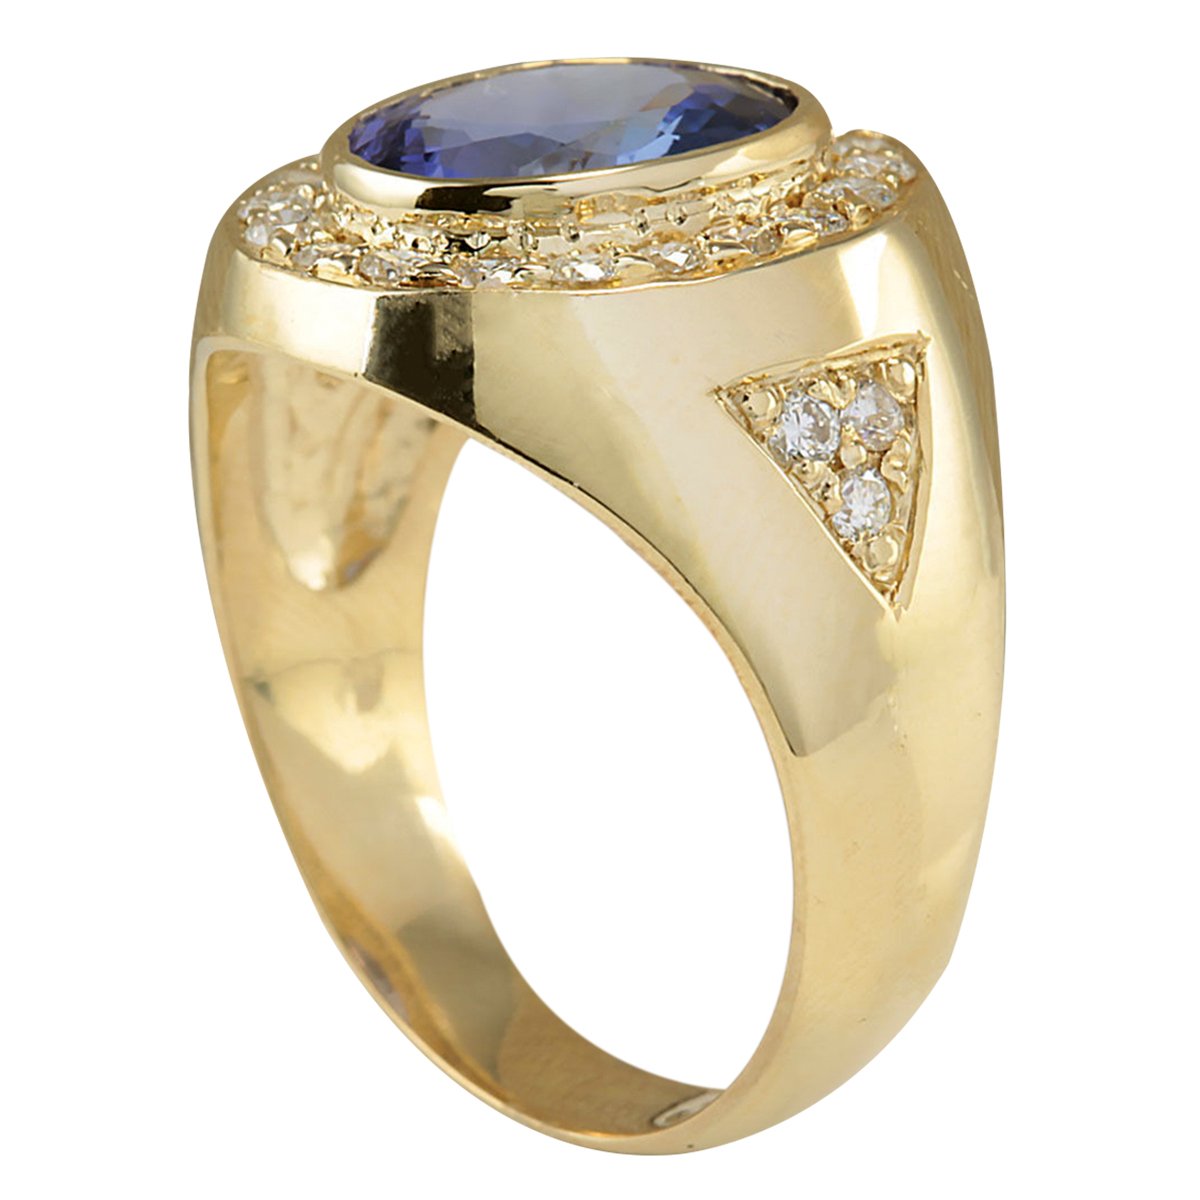 4.95 Carat Natural Blue Tanzanite and Diamond (F-G Color, VS1-VS2 Clarity) 14K Yellow Gold Luxury Statement Ring for Men Exclusively Handcrafted in USA